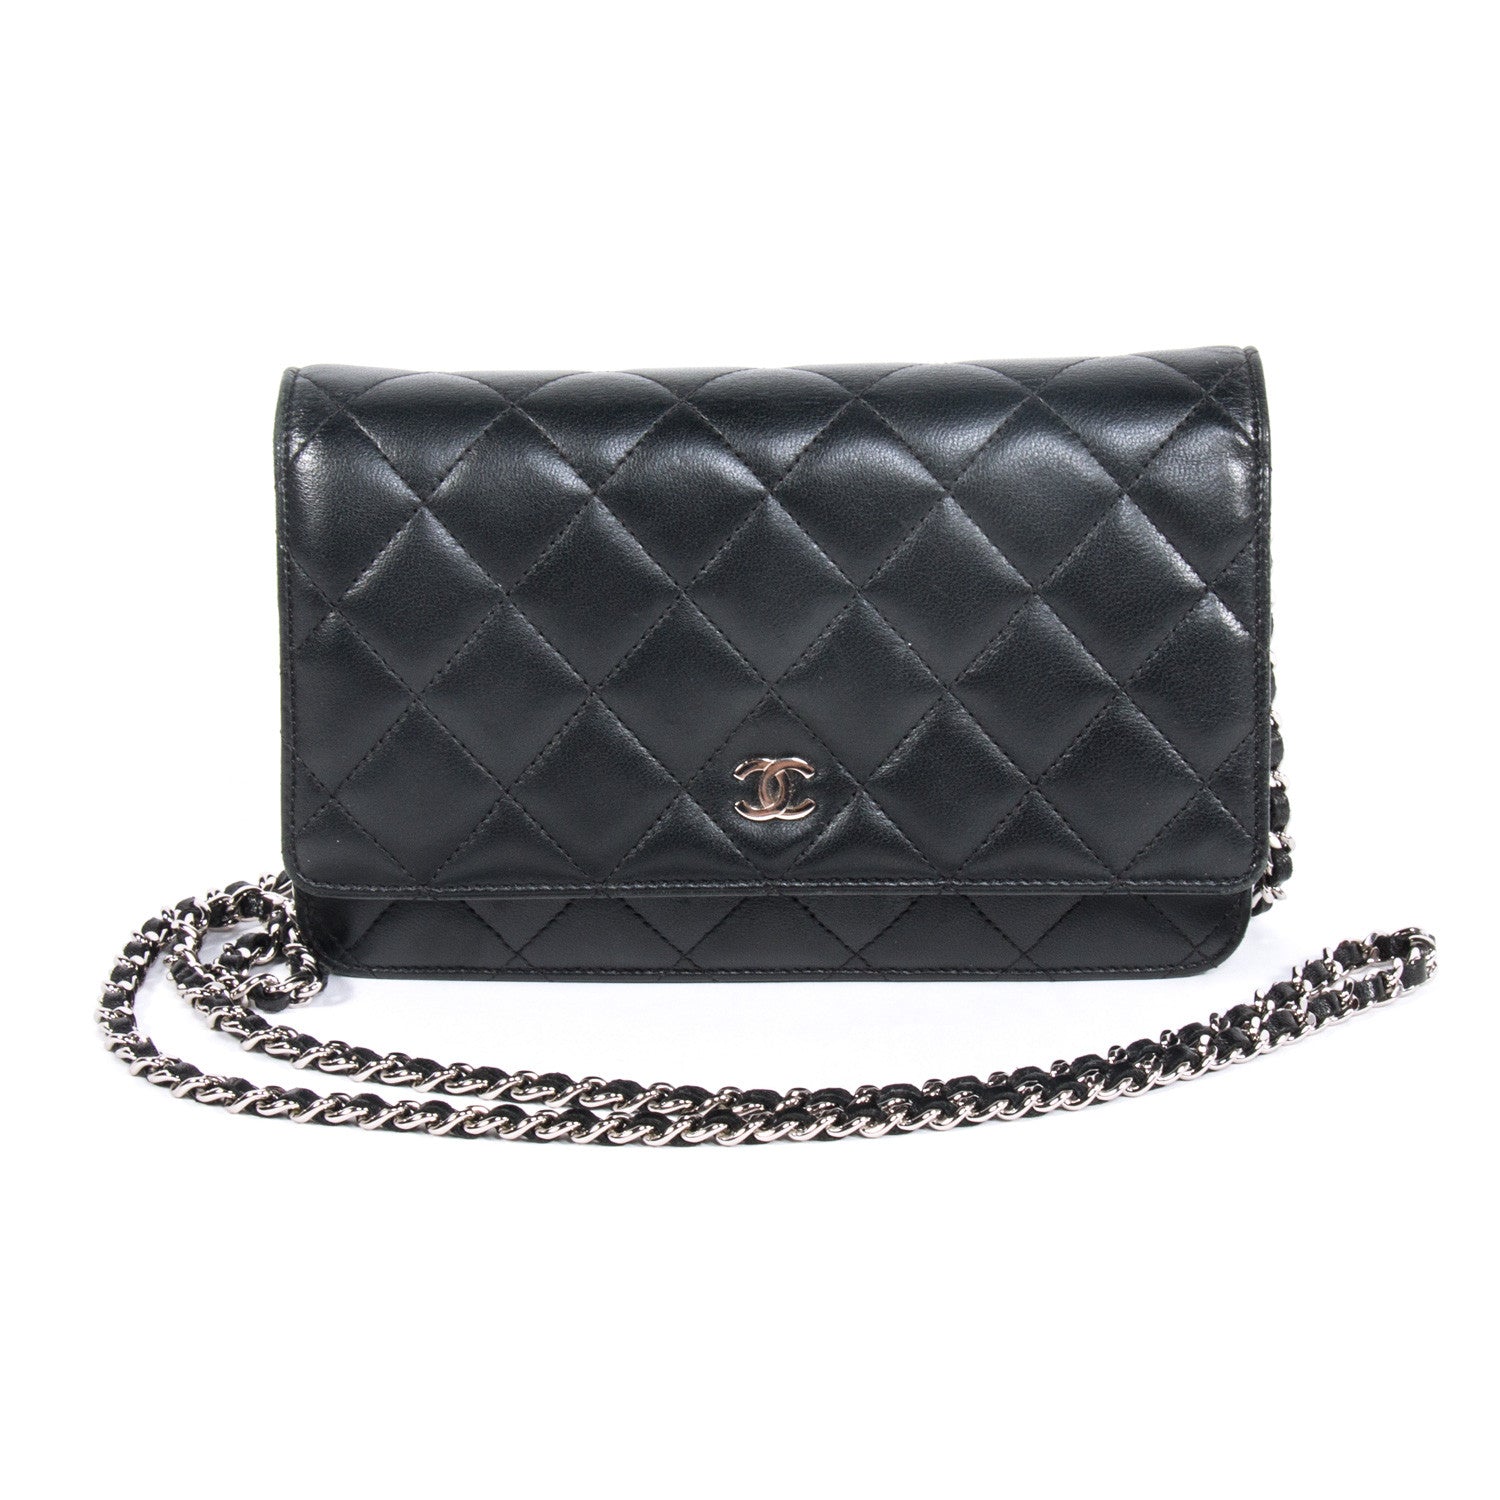 Shop authentic Chanel Quilted Chain Wallet at revogue for just USD